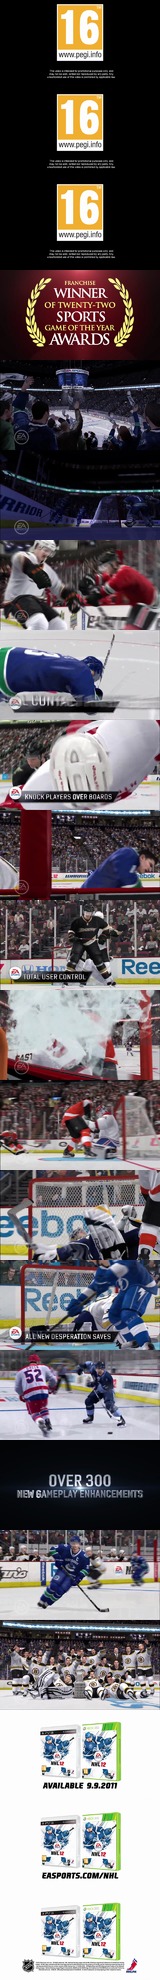  Video NHL 12 Features-Trailer | BahVideo.com